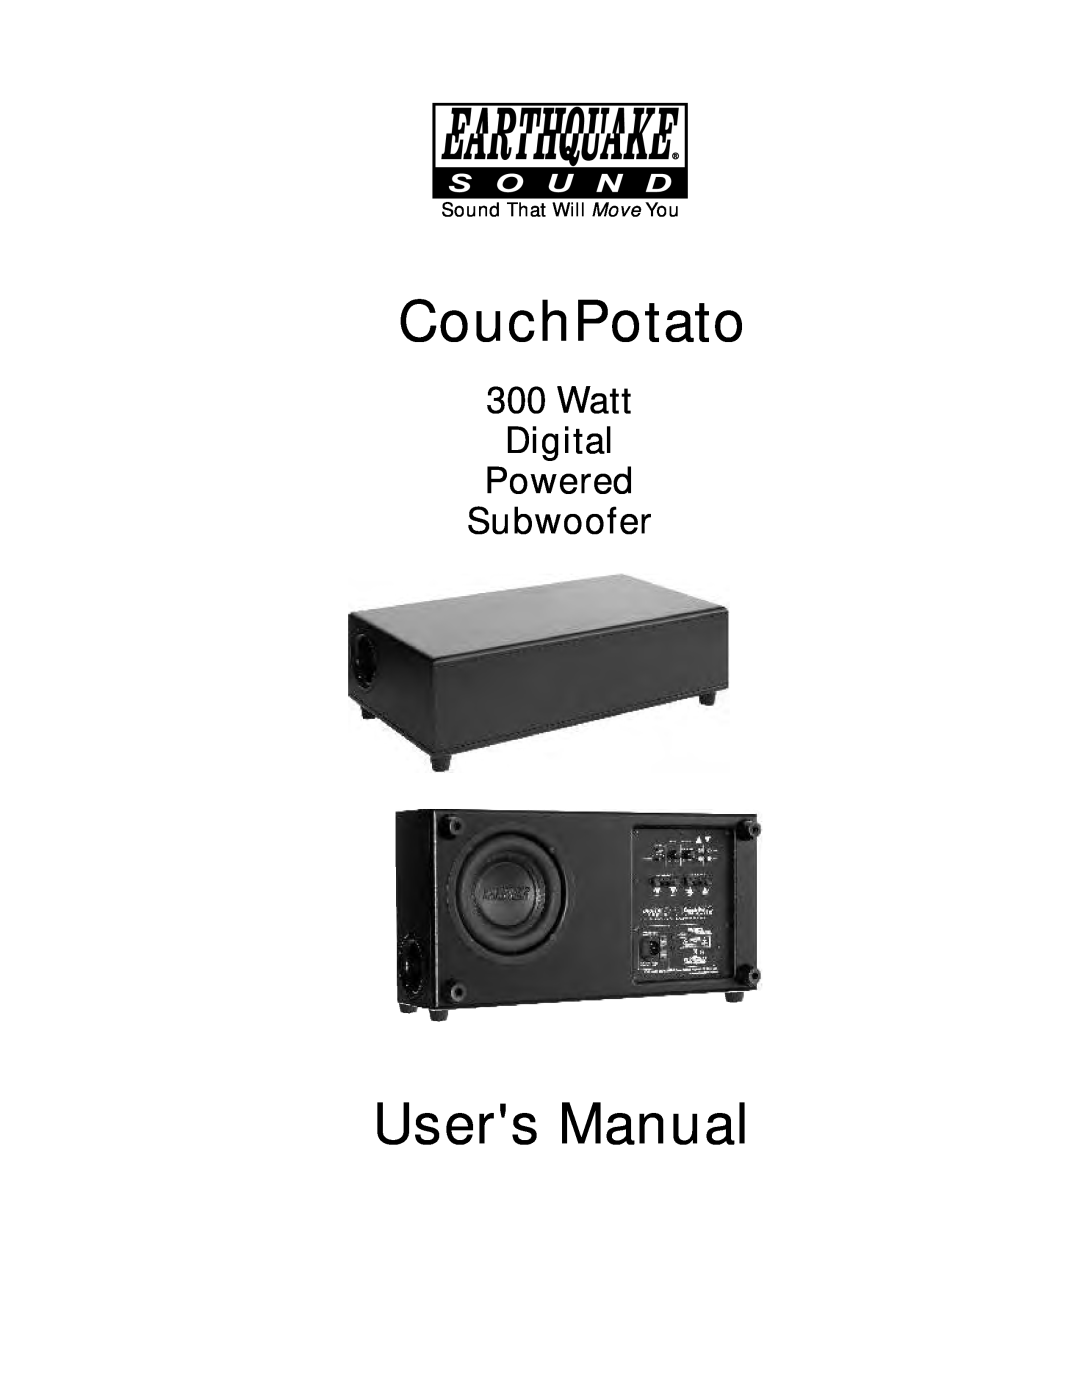 Earthquake Sound CP-8 user manual CouchPotato, 300Watt Digital Powered Subwoofer, Sound That Will Move You 